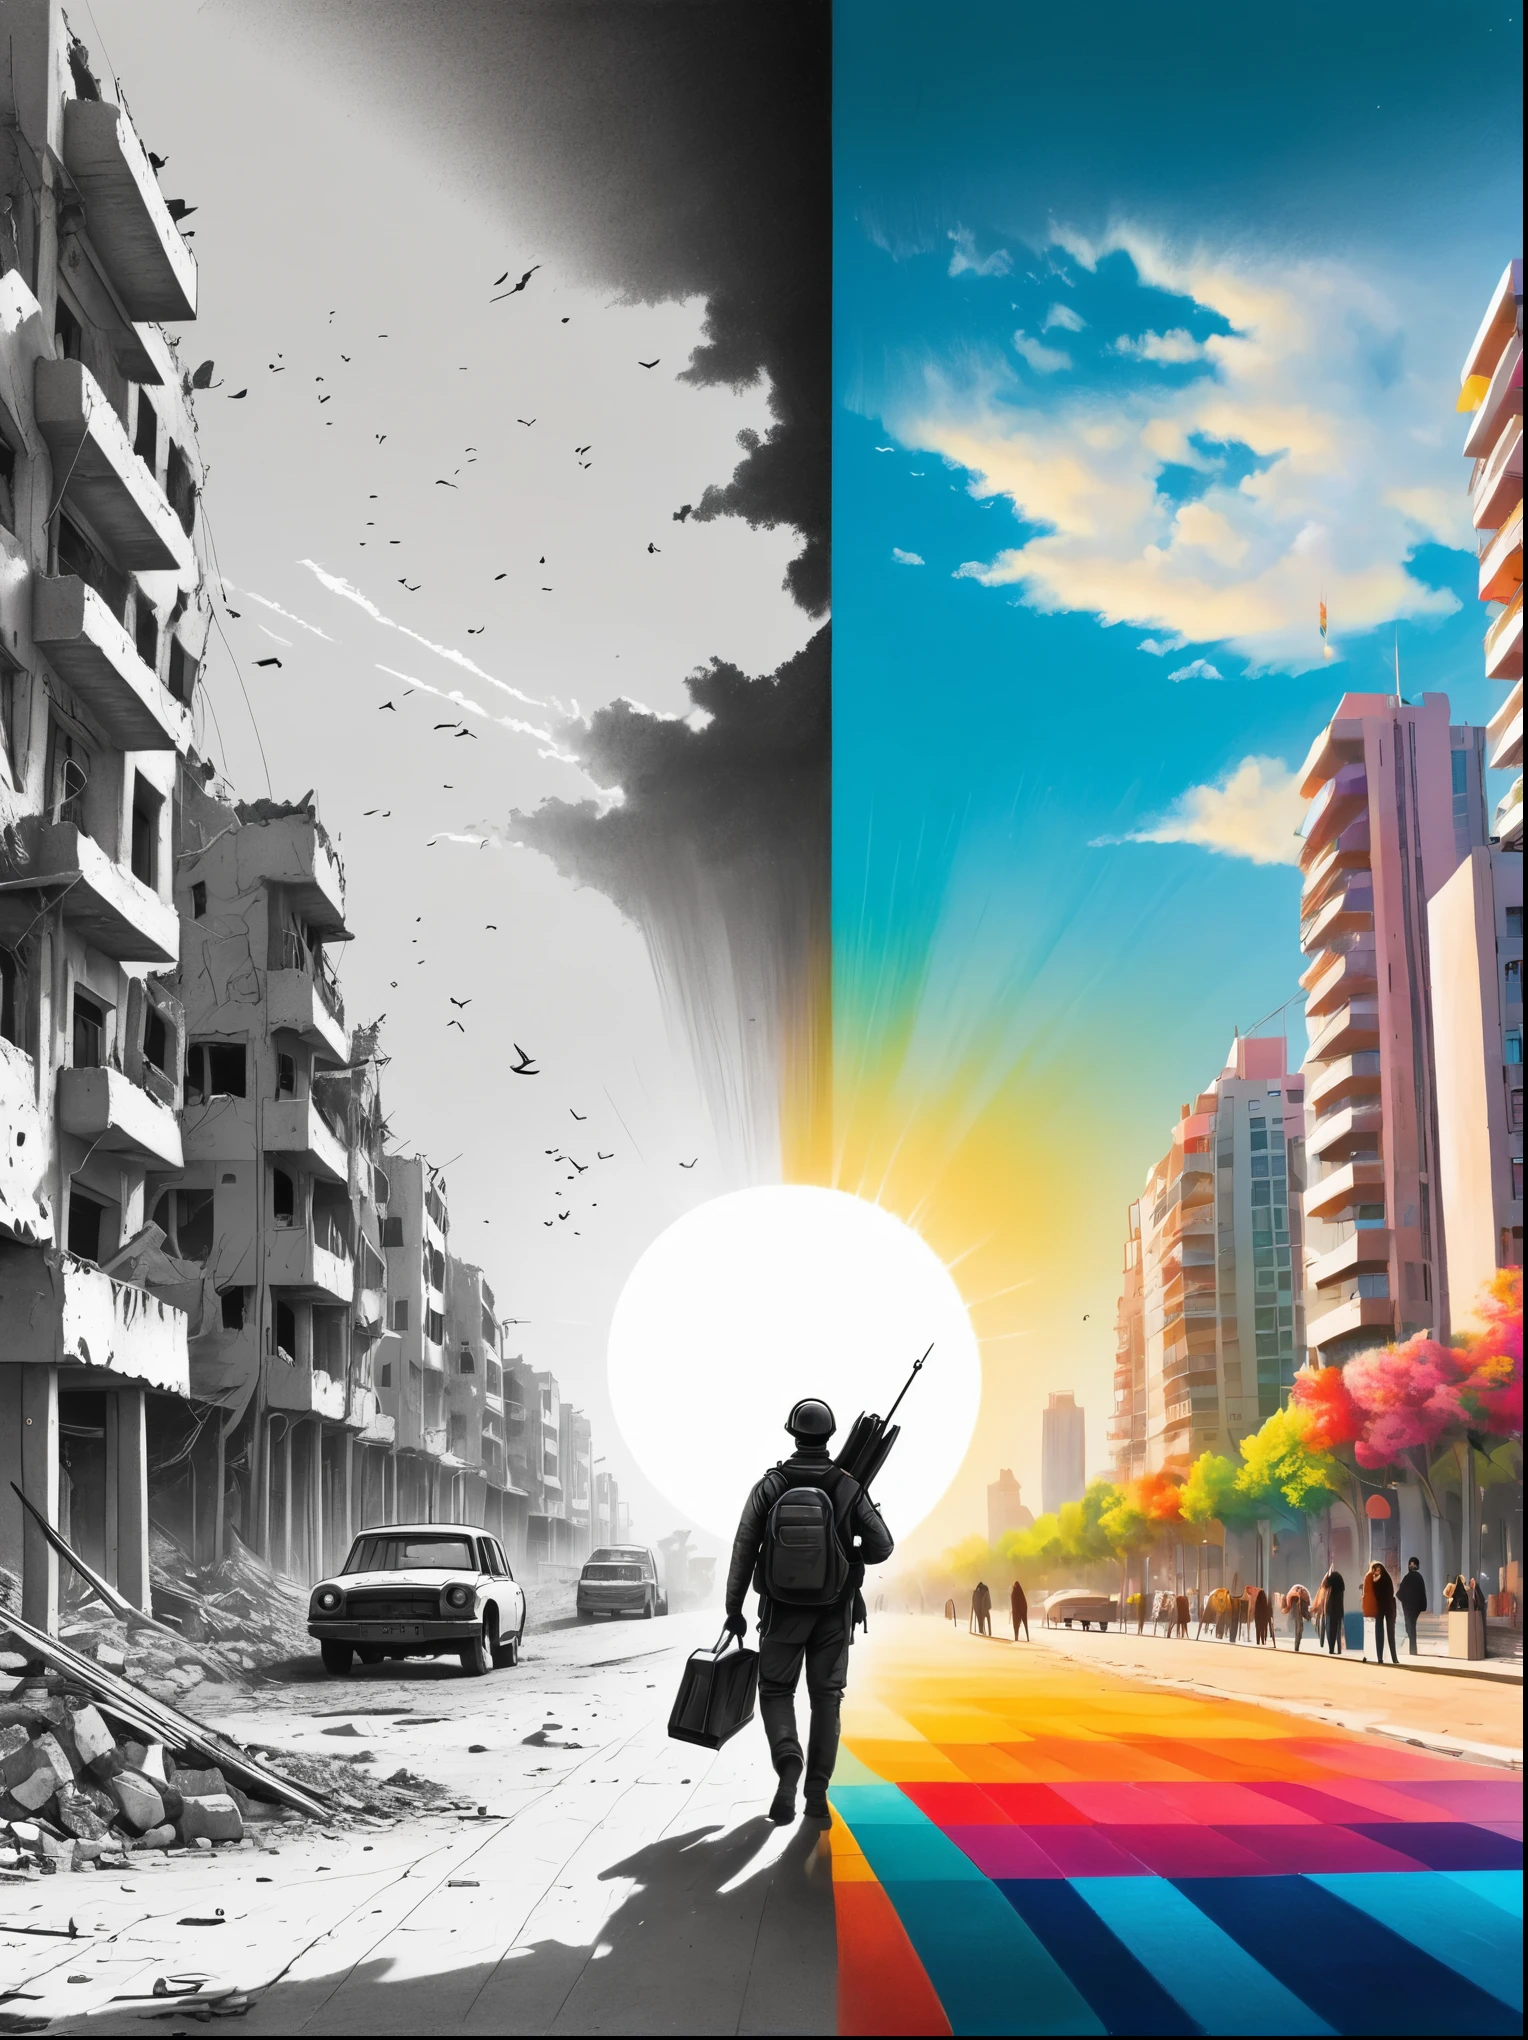 (The left half is a black and white line drawing of the war-torn and ruined city of Gaza:1.3), (The right half is a beautiful and pleasant city with tall buildings, bright sunshine and bright colors:1.5), ((The artwork should transition from a pencil drawing style in black and white on the left half to vibrant colors on the right half, Ensure a seamless integration between the two halves without any dividing line, with the left side featuring detailed black and white pencil strokes and the right side filled with colors, creating a harmonious blend across the image)), excellent quality, Detailed background, The art of math